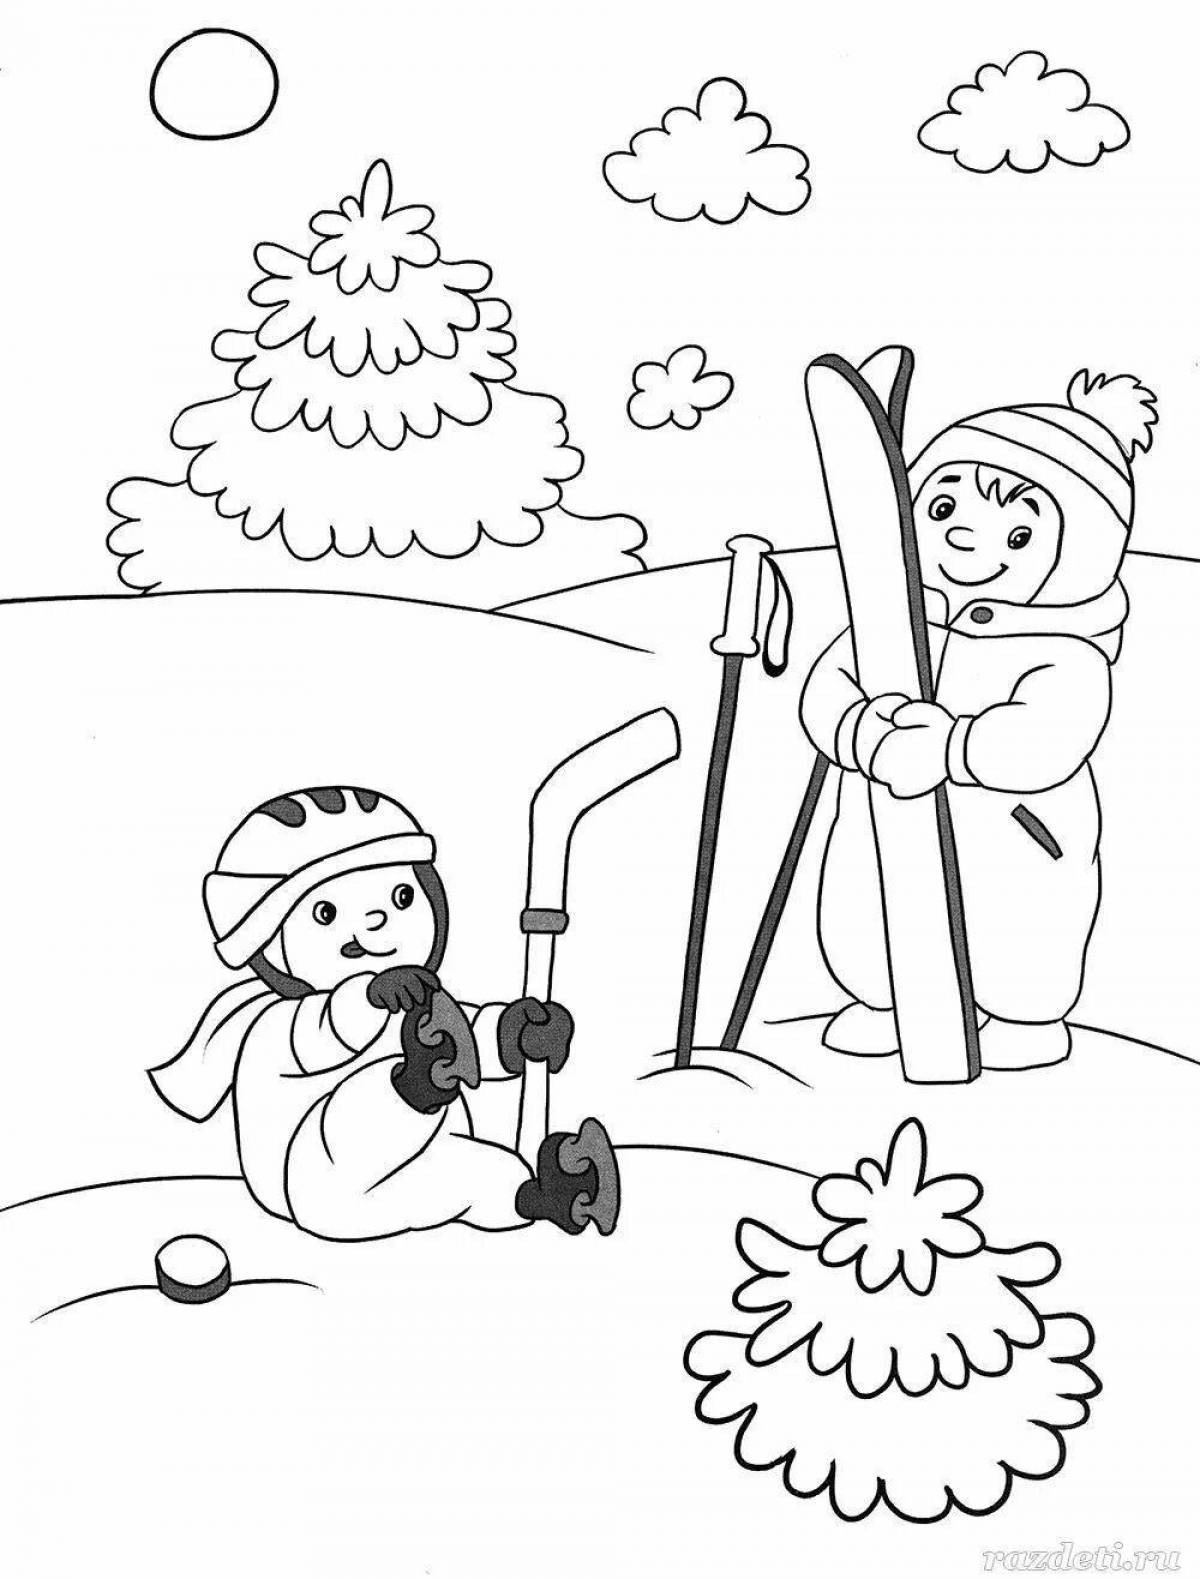 Majestic coloring page 4 5 years of winter